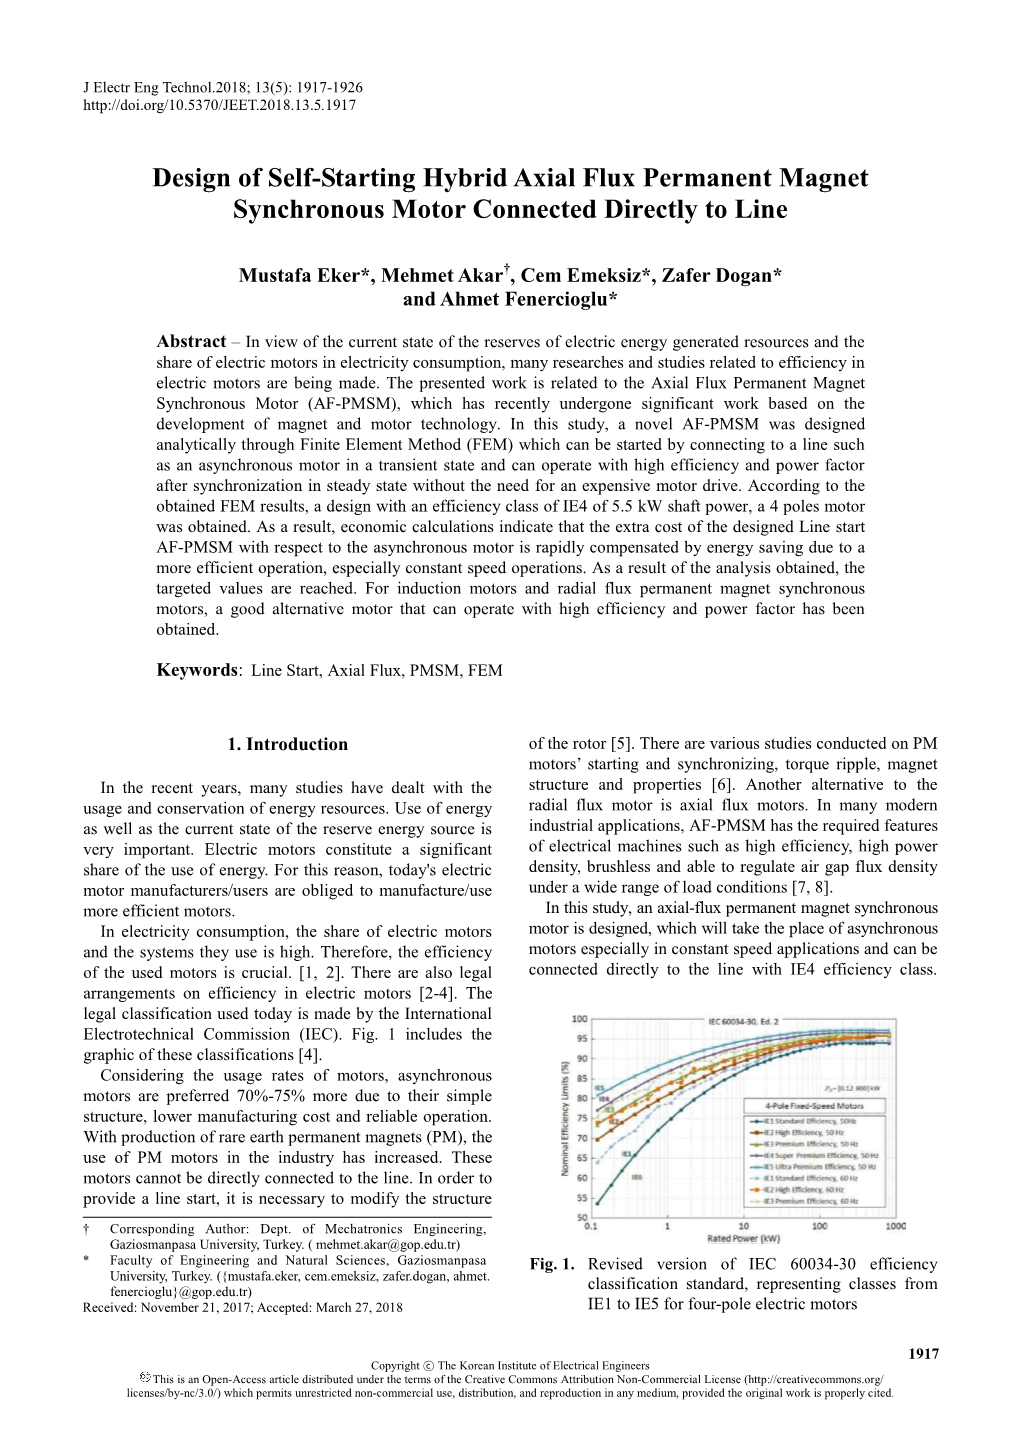 Design of Self-Starting Hybrid Axial Flux Permanent Magnet Synchronous Motor Connected Directly to Line